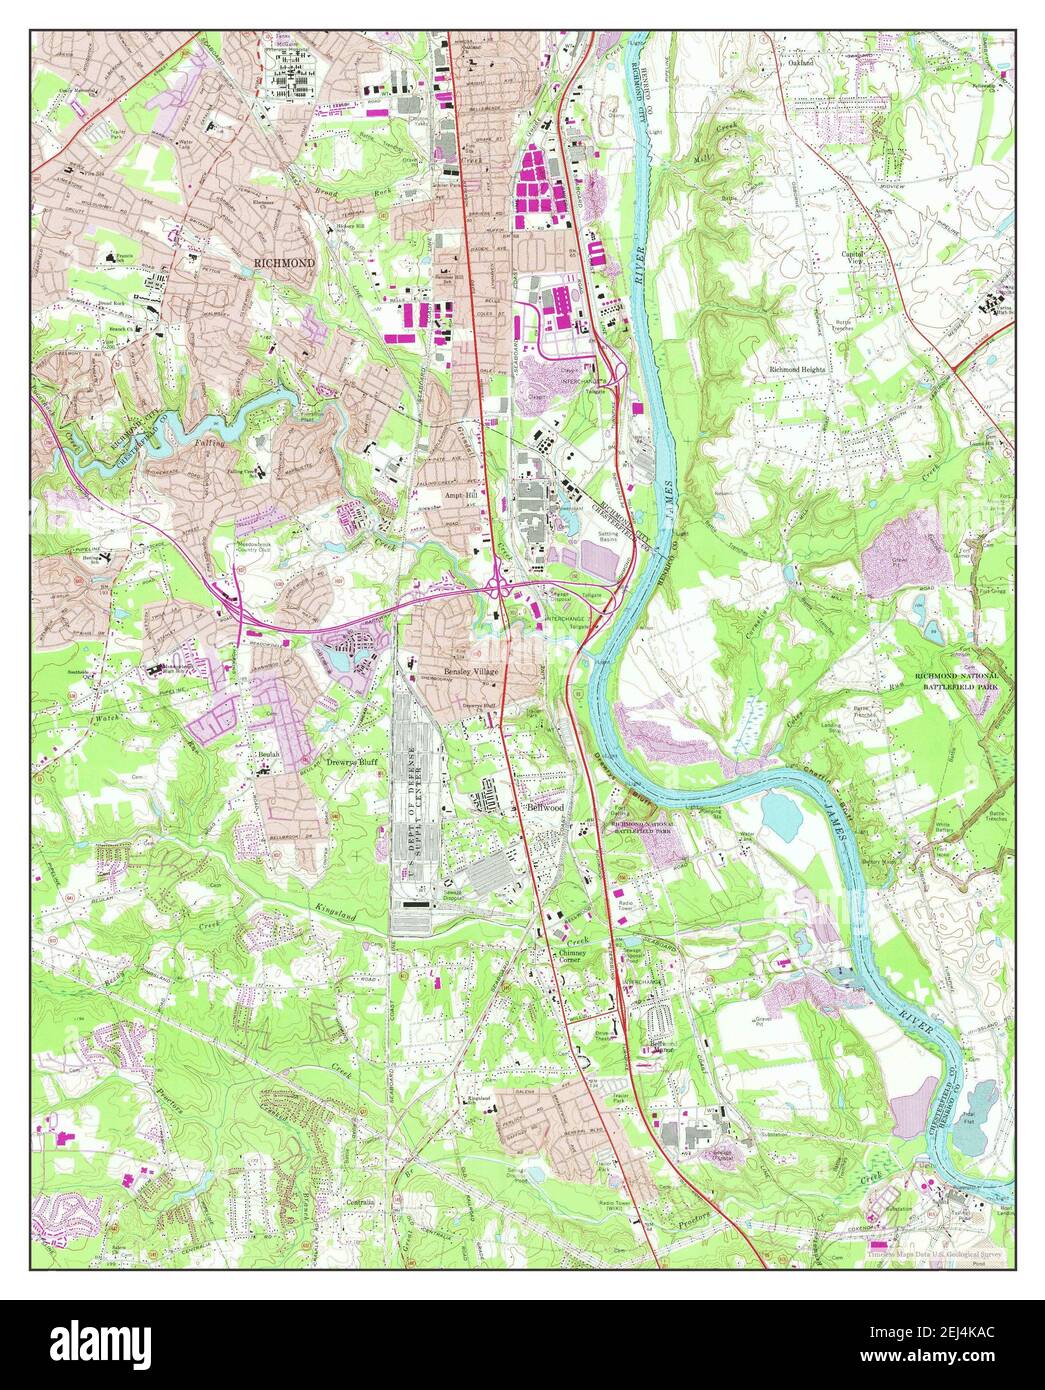 Drewrys Bluff, Virginia, map 1969, 1:24000, United States of America by Timeless Maps, data U.S. Geological Survey Stock Photo